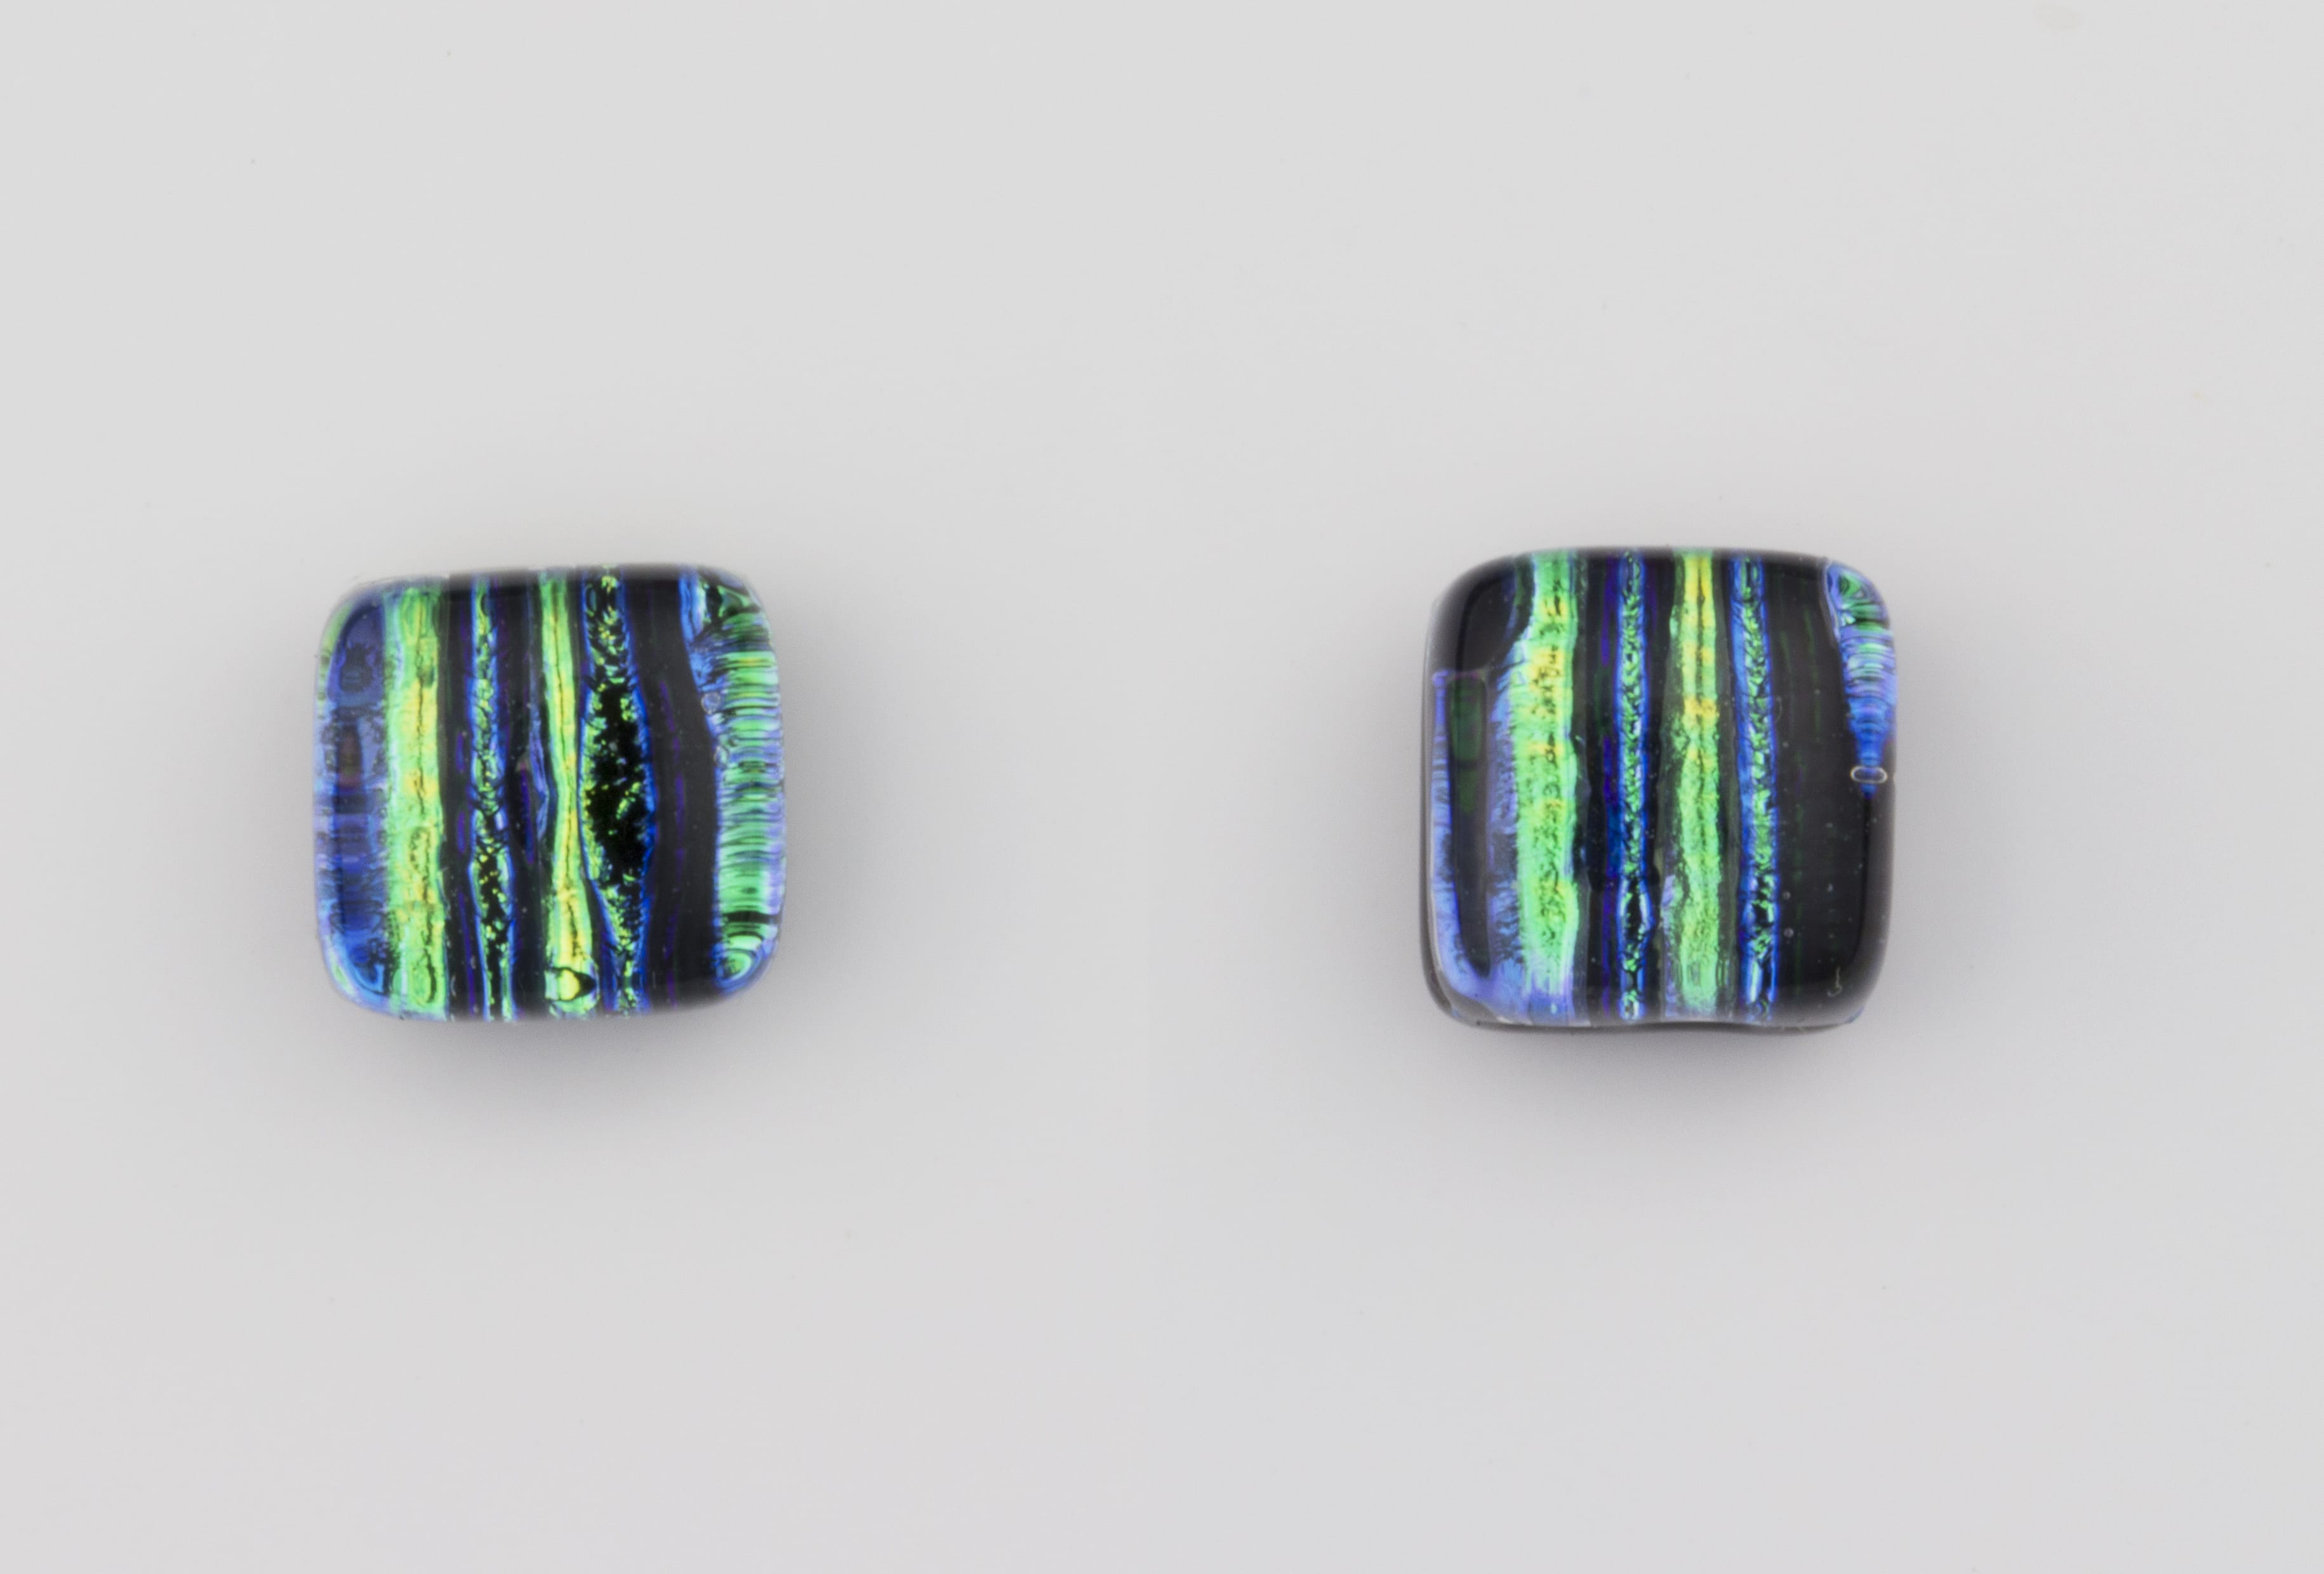 Dichroic jewellery uk, handmade stud earrings with striped green, yellow, black, blue. Square, glass 8-10mm, sterling silver